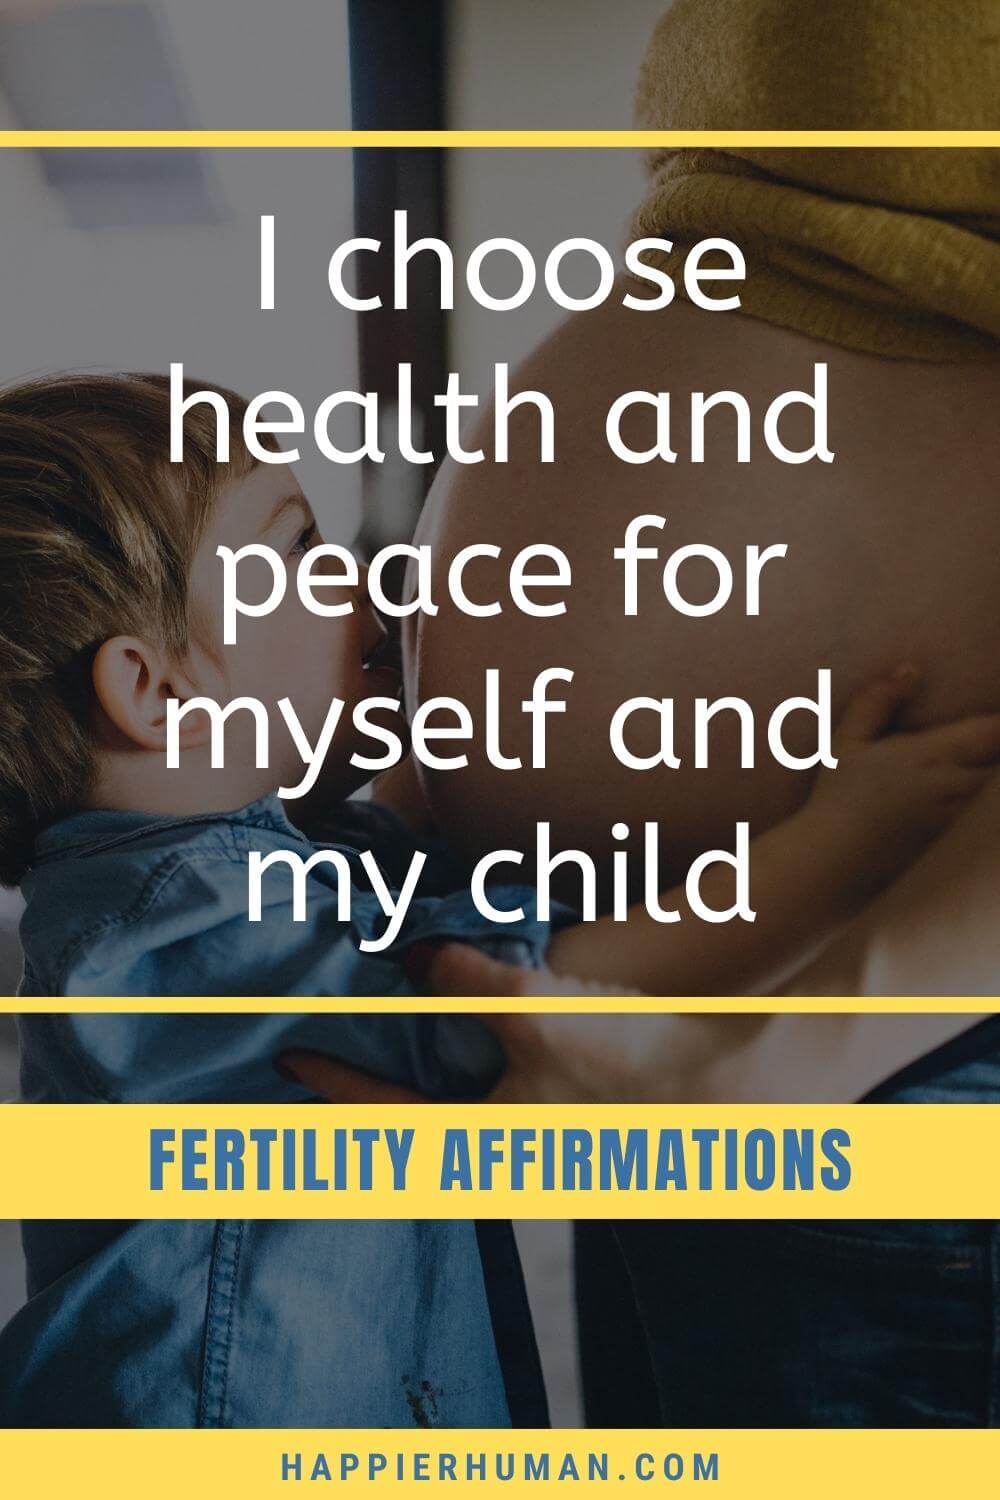 Fertility Affirmations - I choose health and peace for myself and my child | pregnancy affirmations | affirmations for conceiving twins | fertility affirmations app